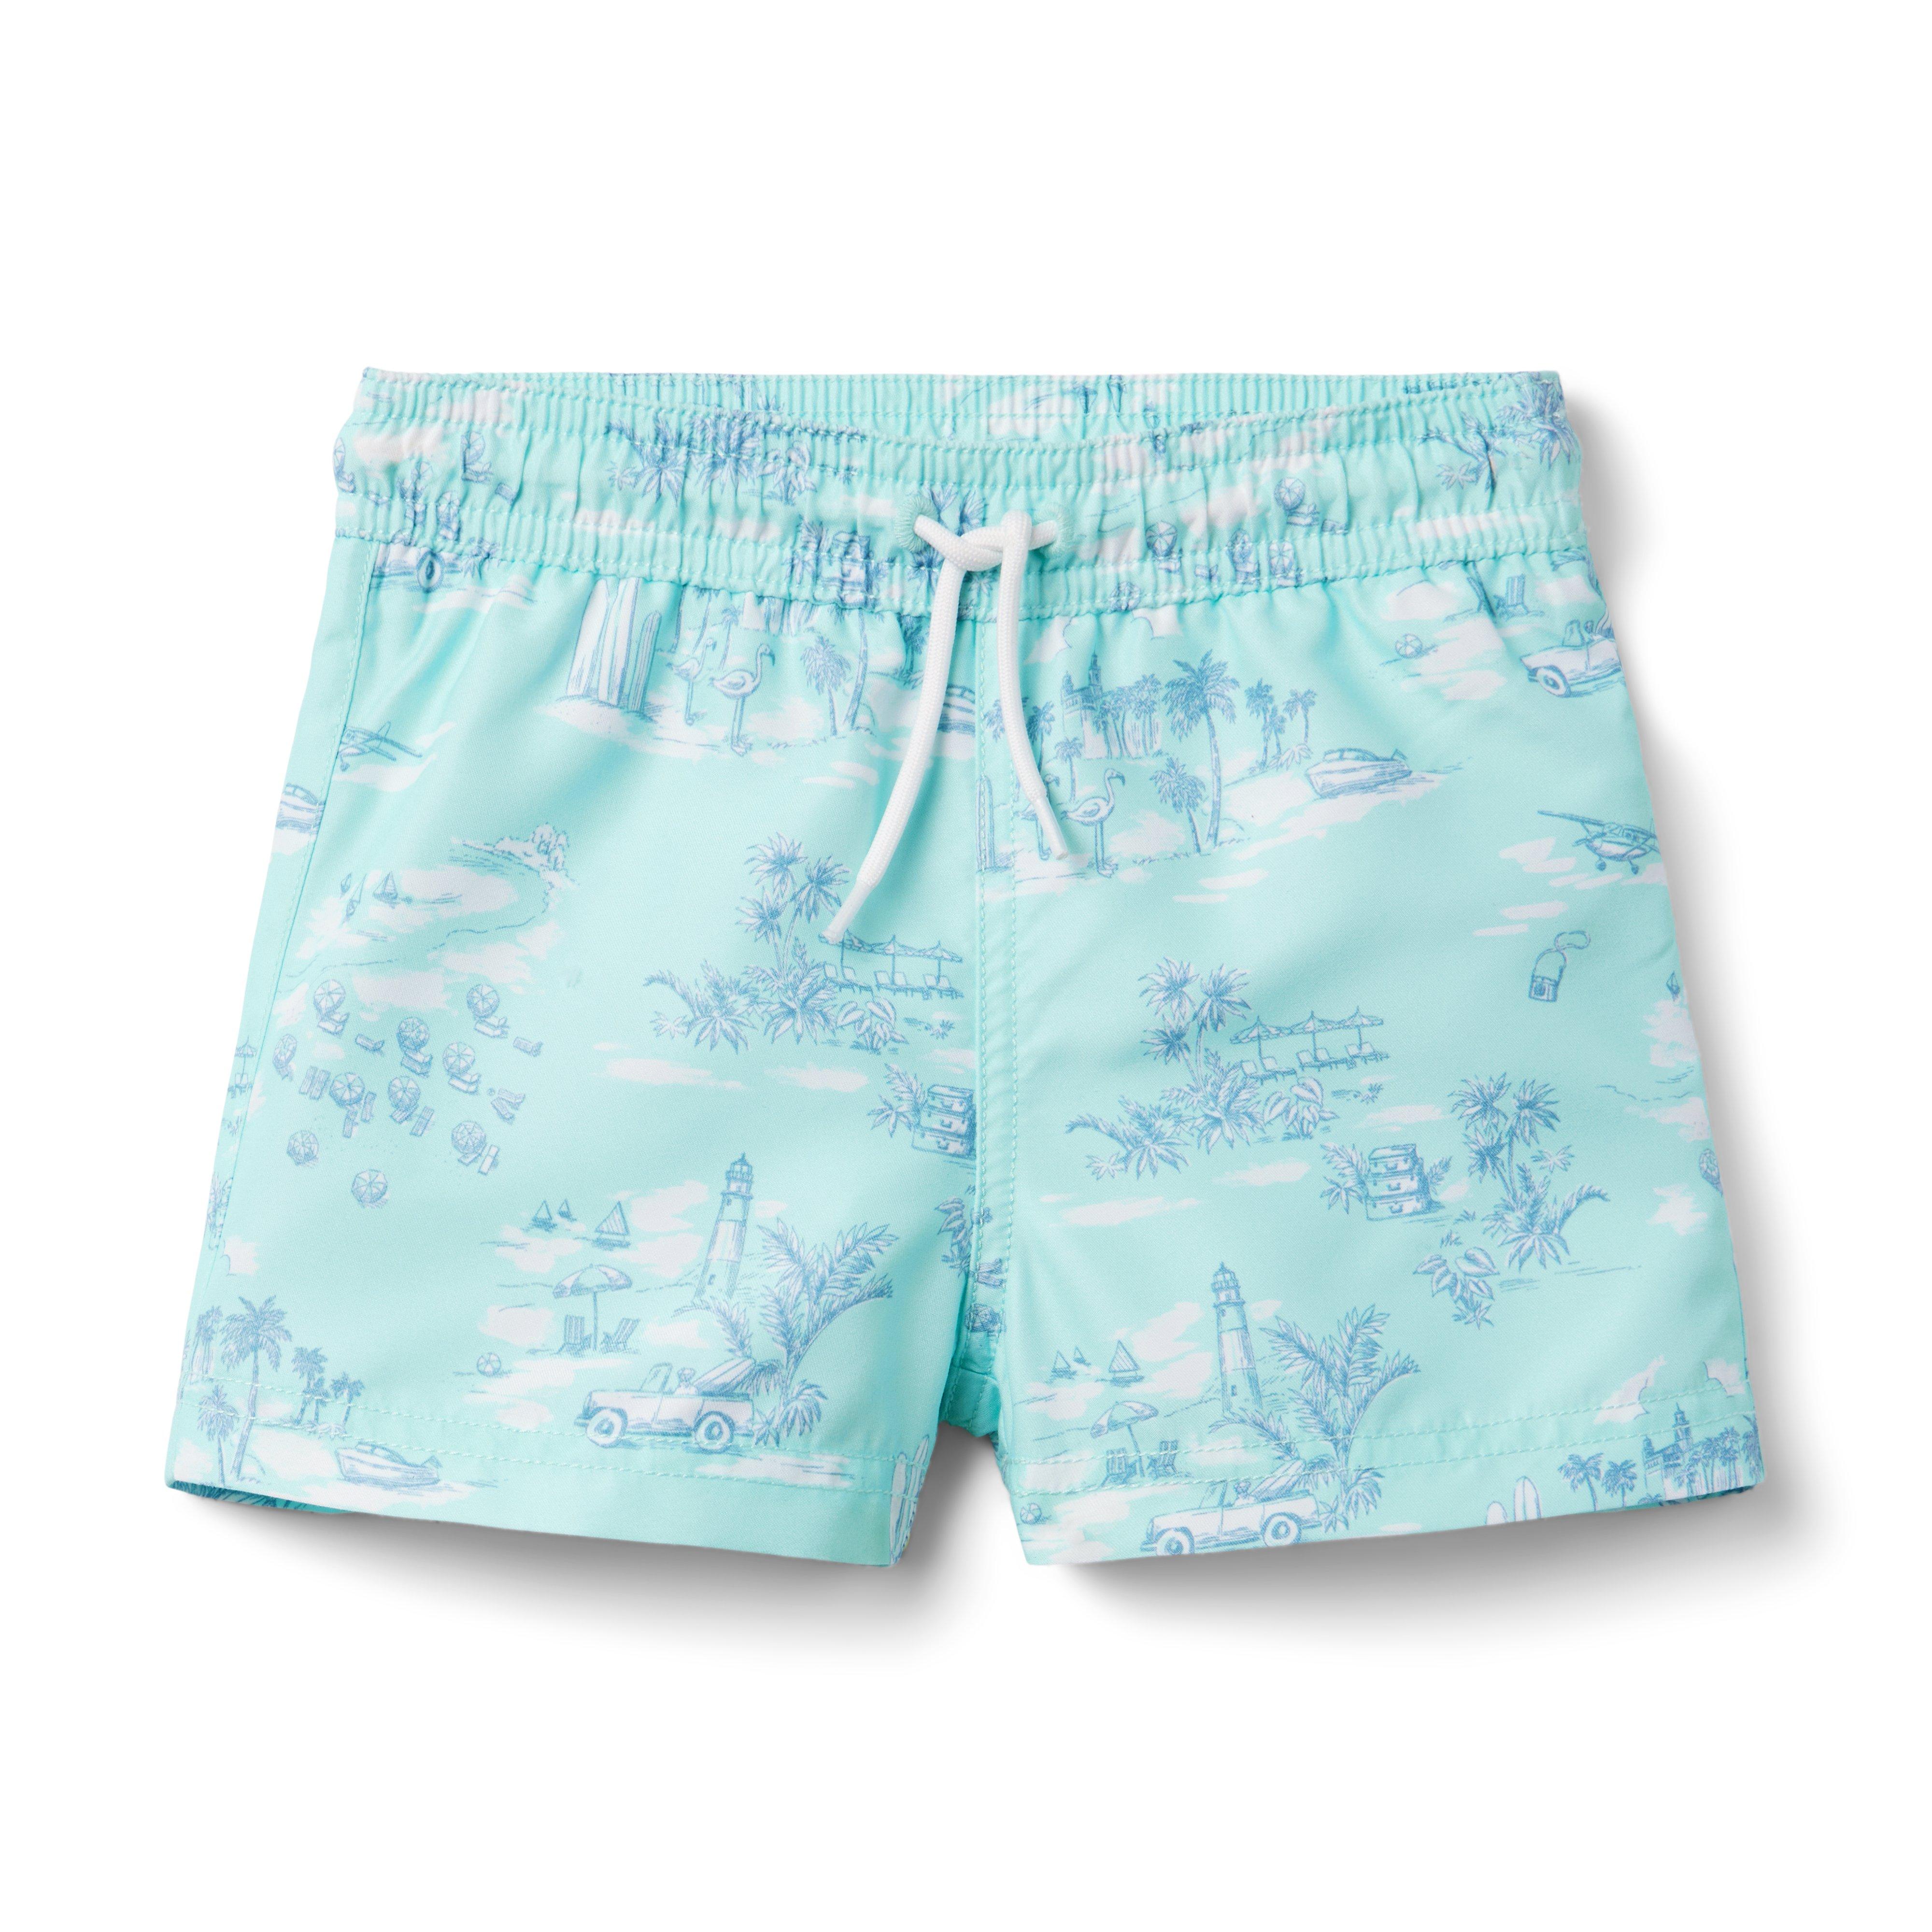 Gray Malin Recycled Travel Toile Swim Trunk image number 0